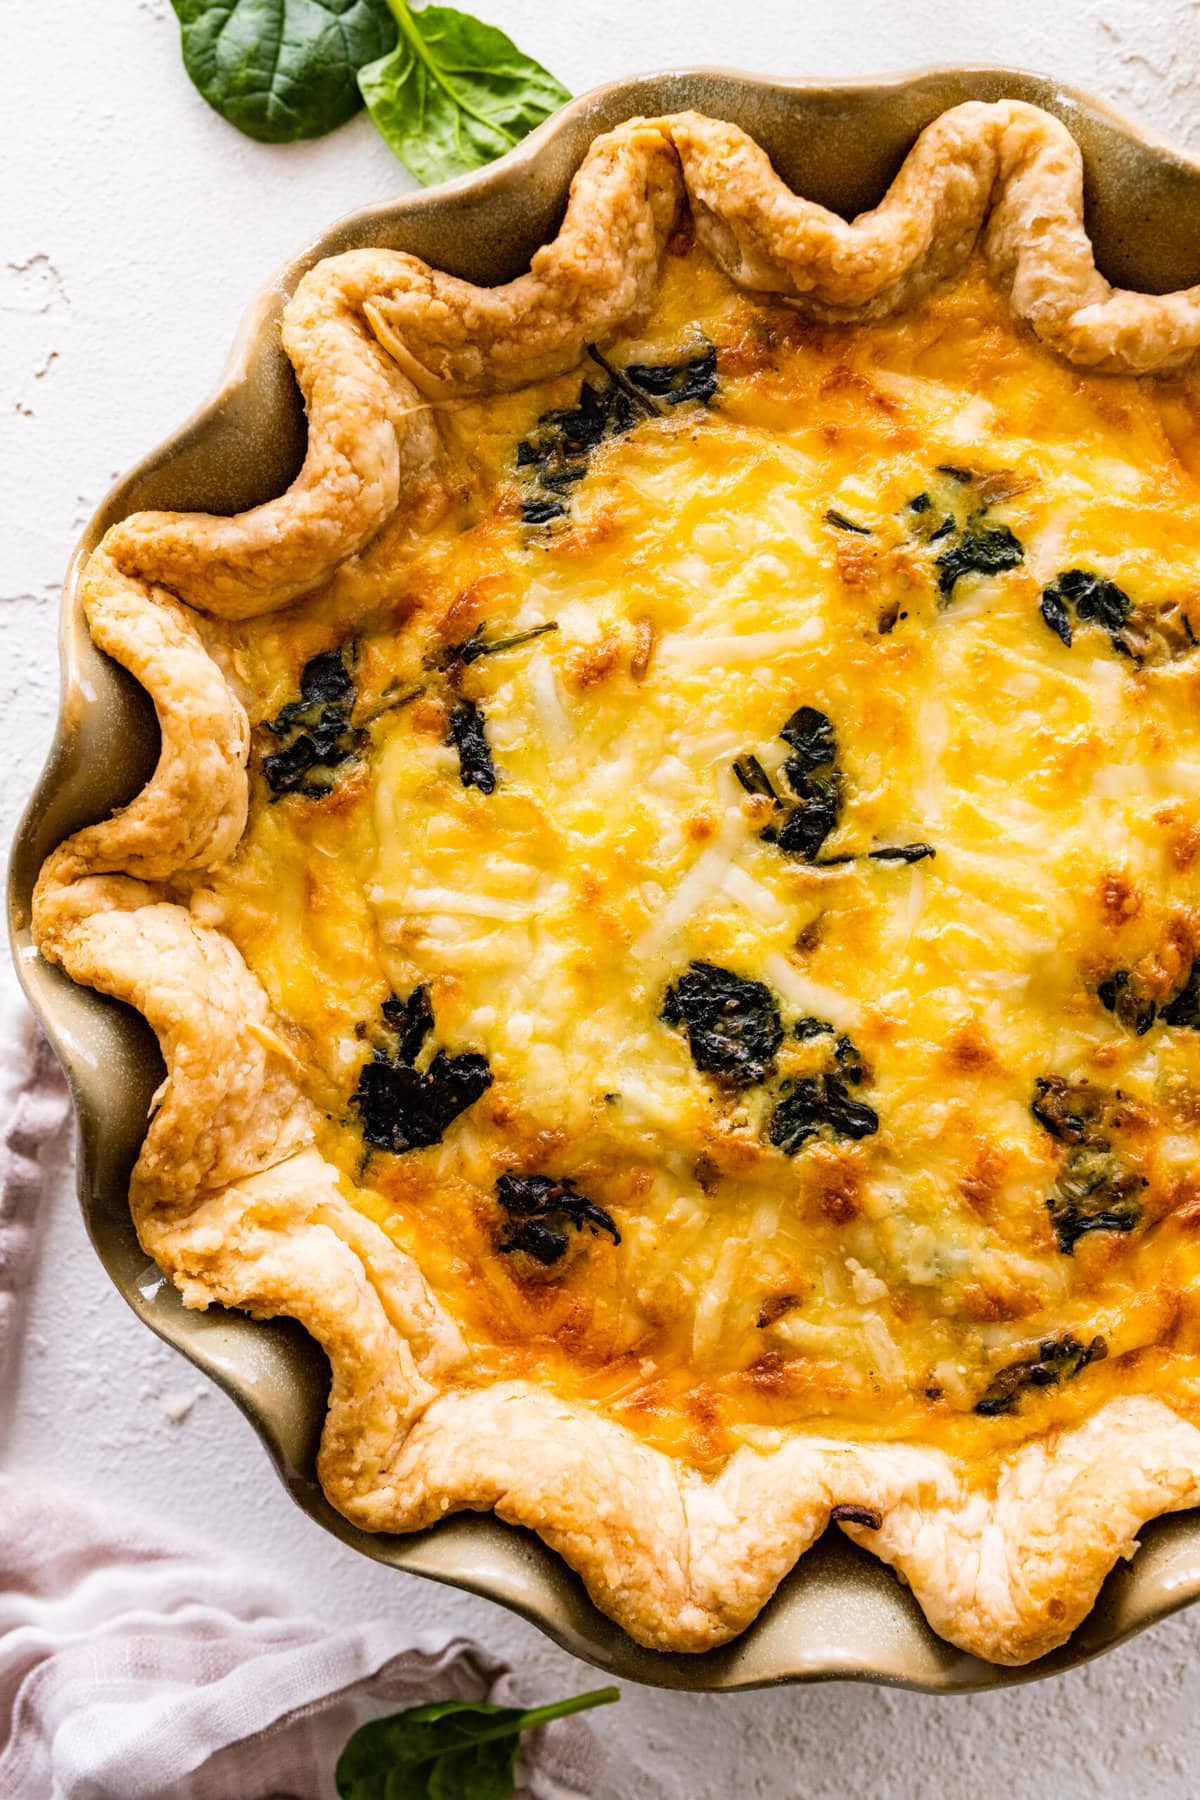 baked spinach quiche recipe out of the oven with golden brown top. 